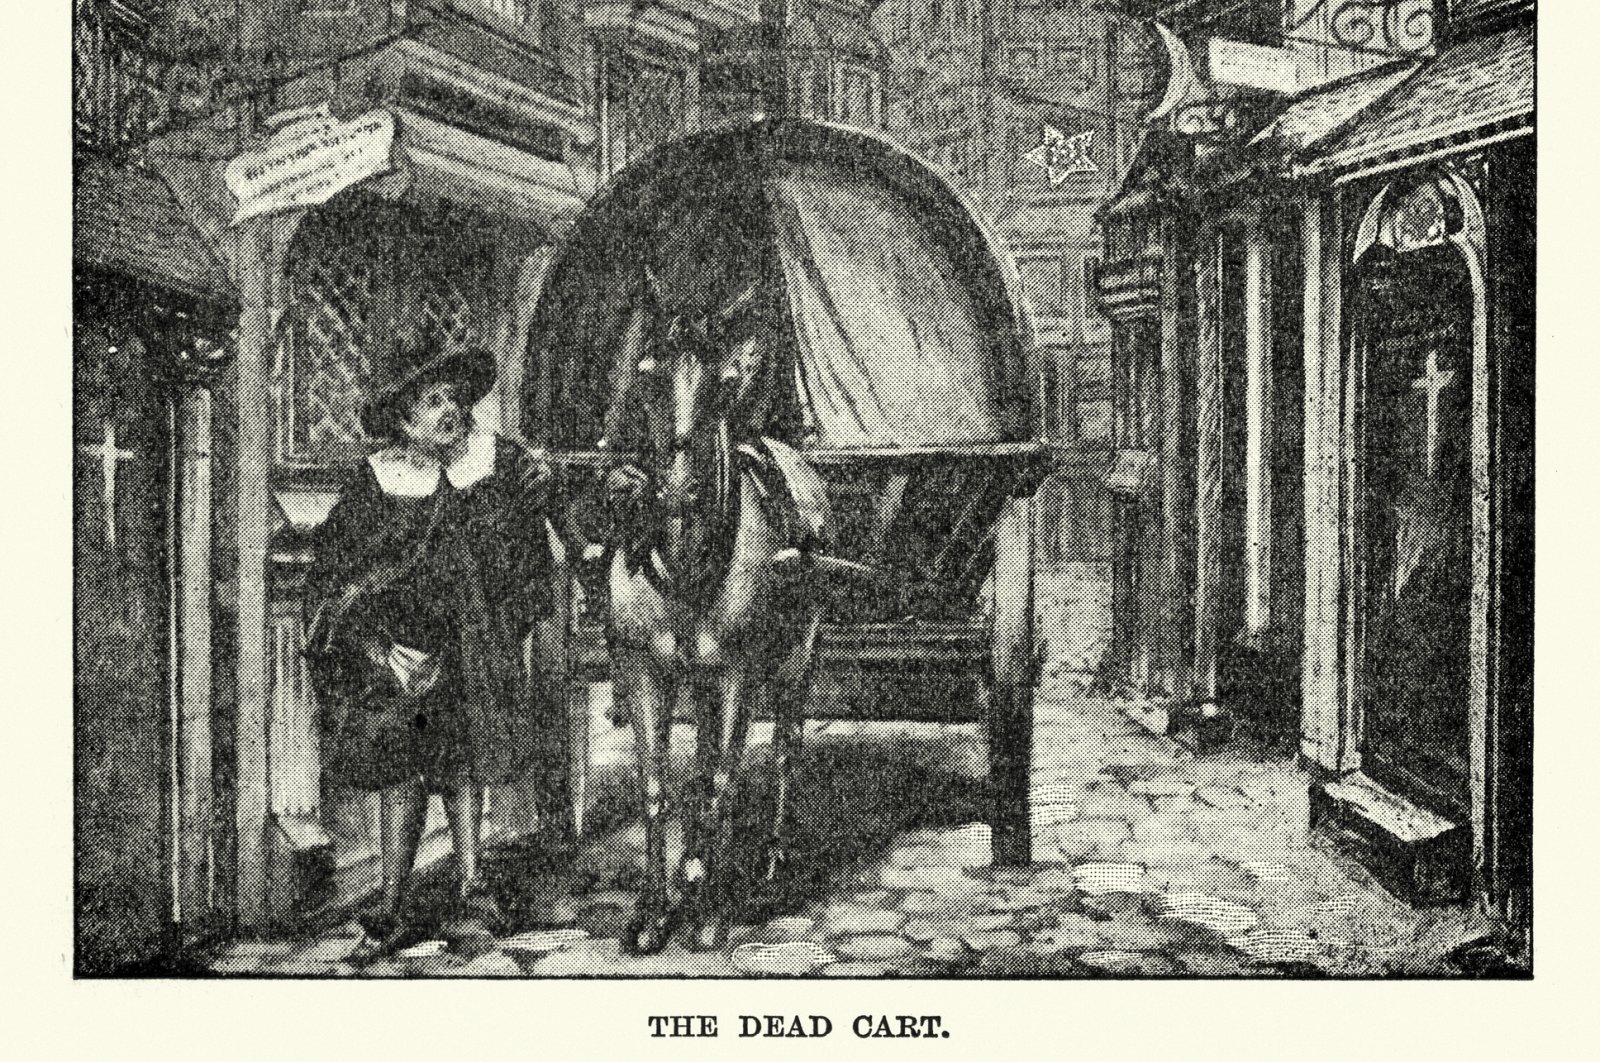 Vintage engraving of a death cart collecting the bodies of victims during the Great Plague of London. (iStock Photo)